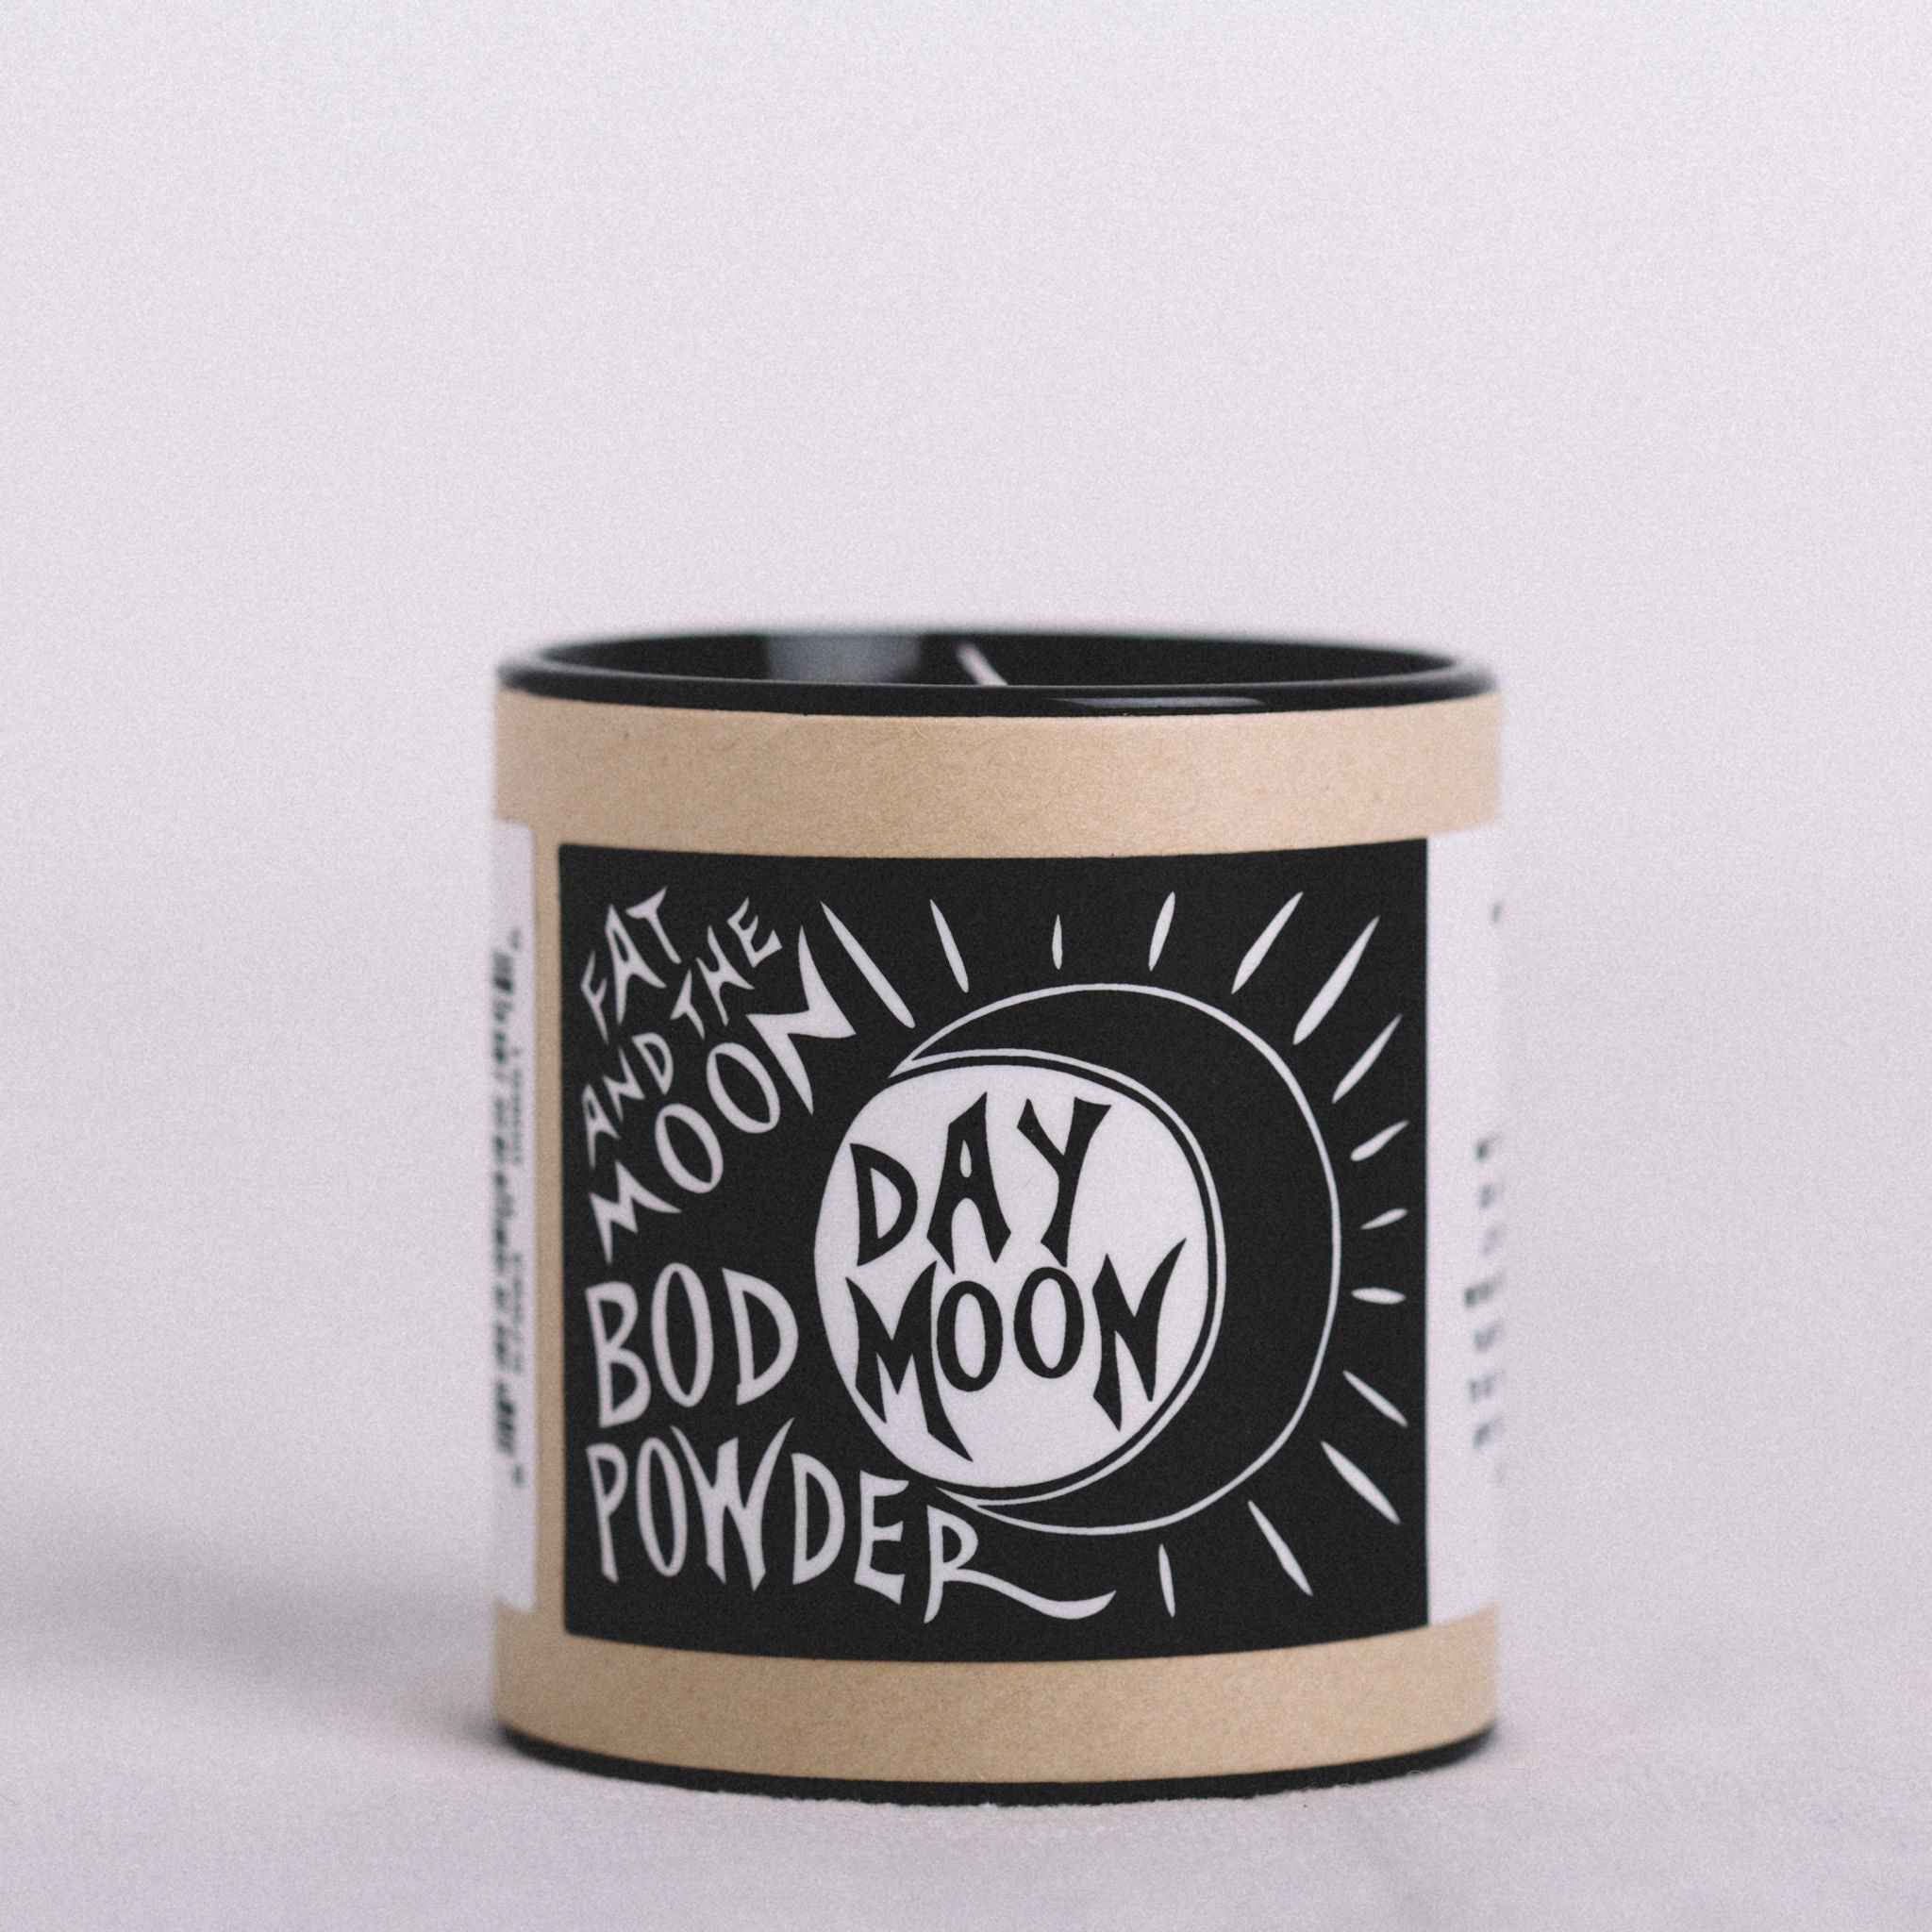 BOD POWDER || FAT AND THE MOON